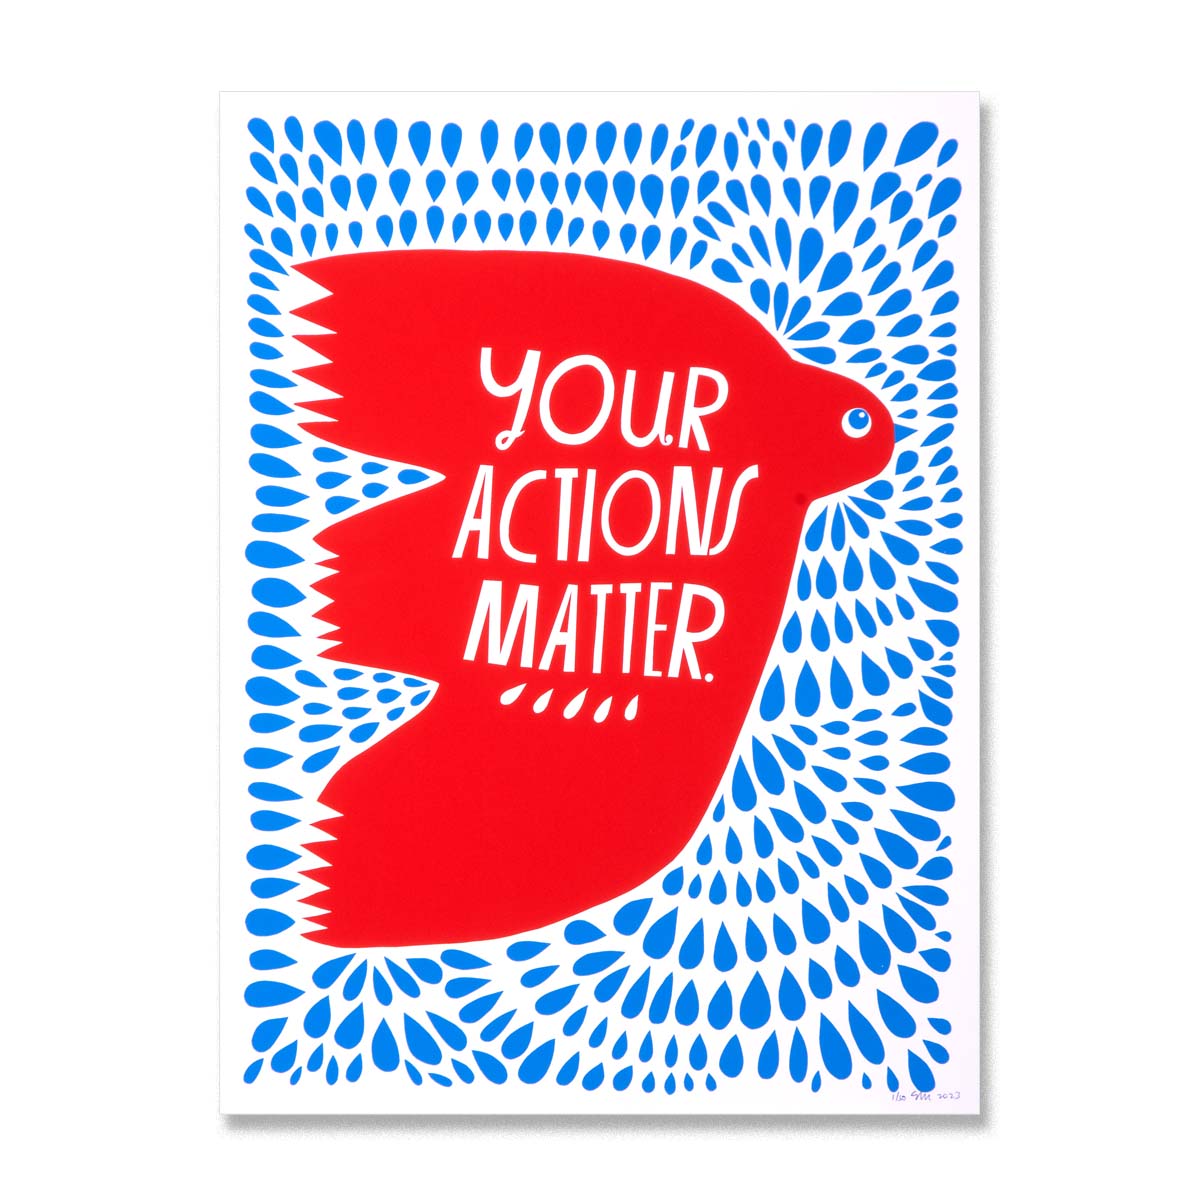 Your Actions Matter - Limited Edition Serigraph